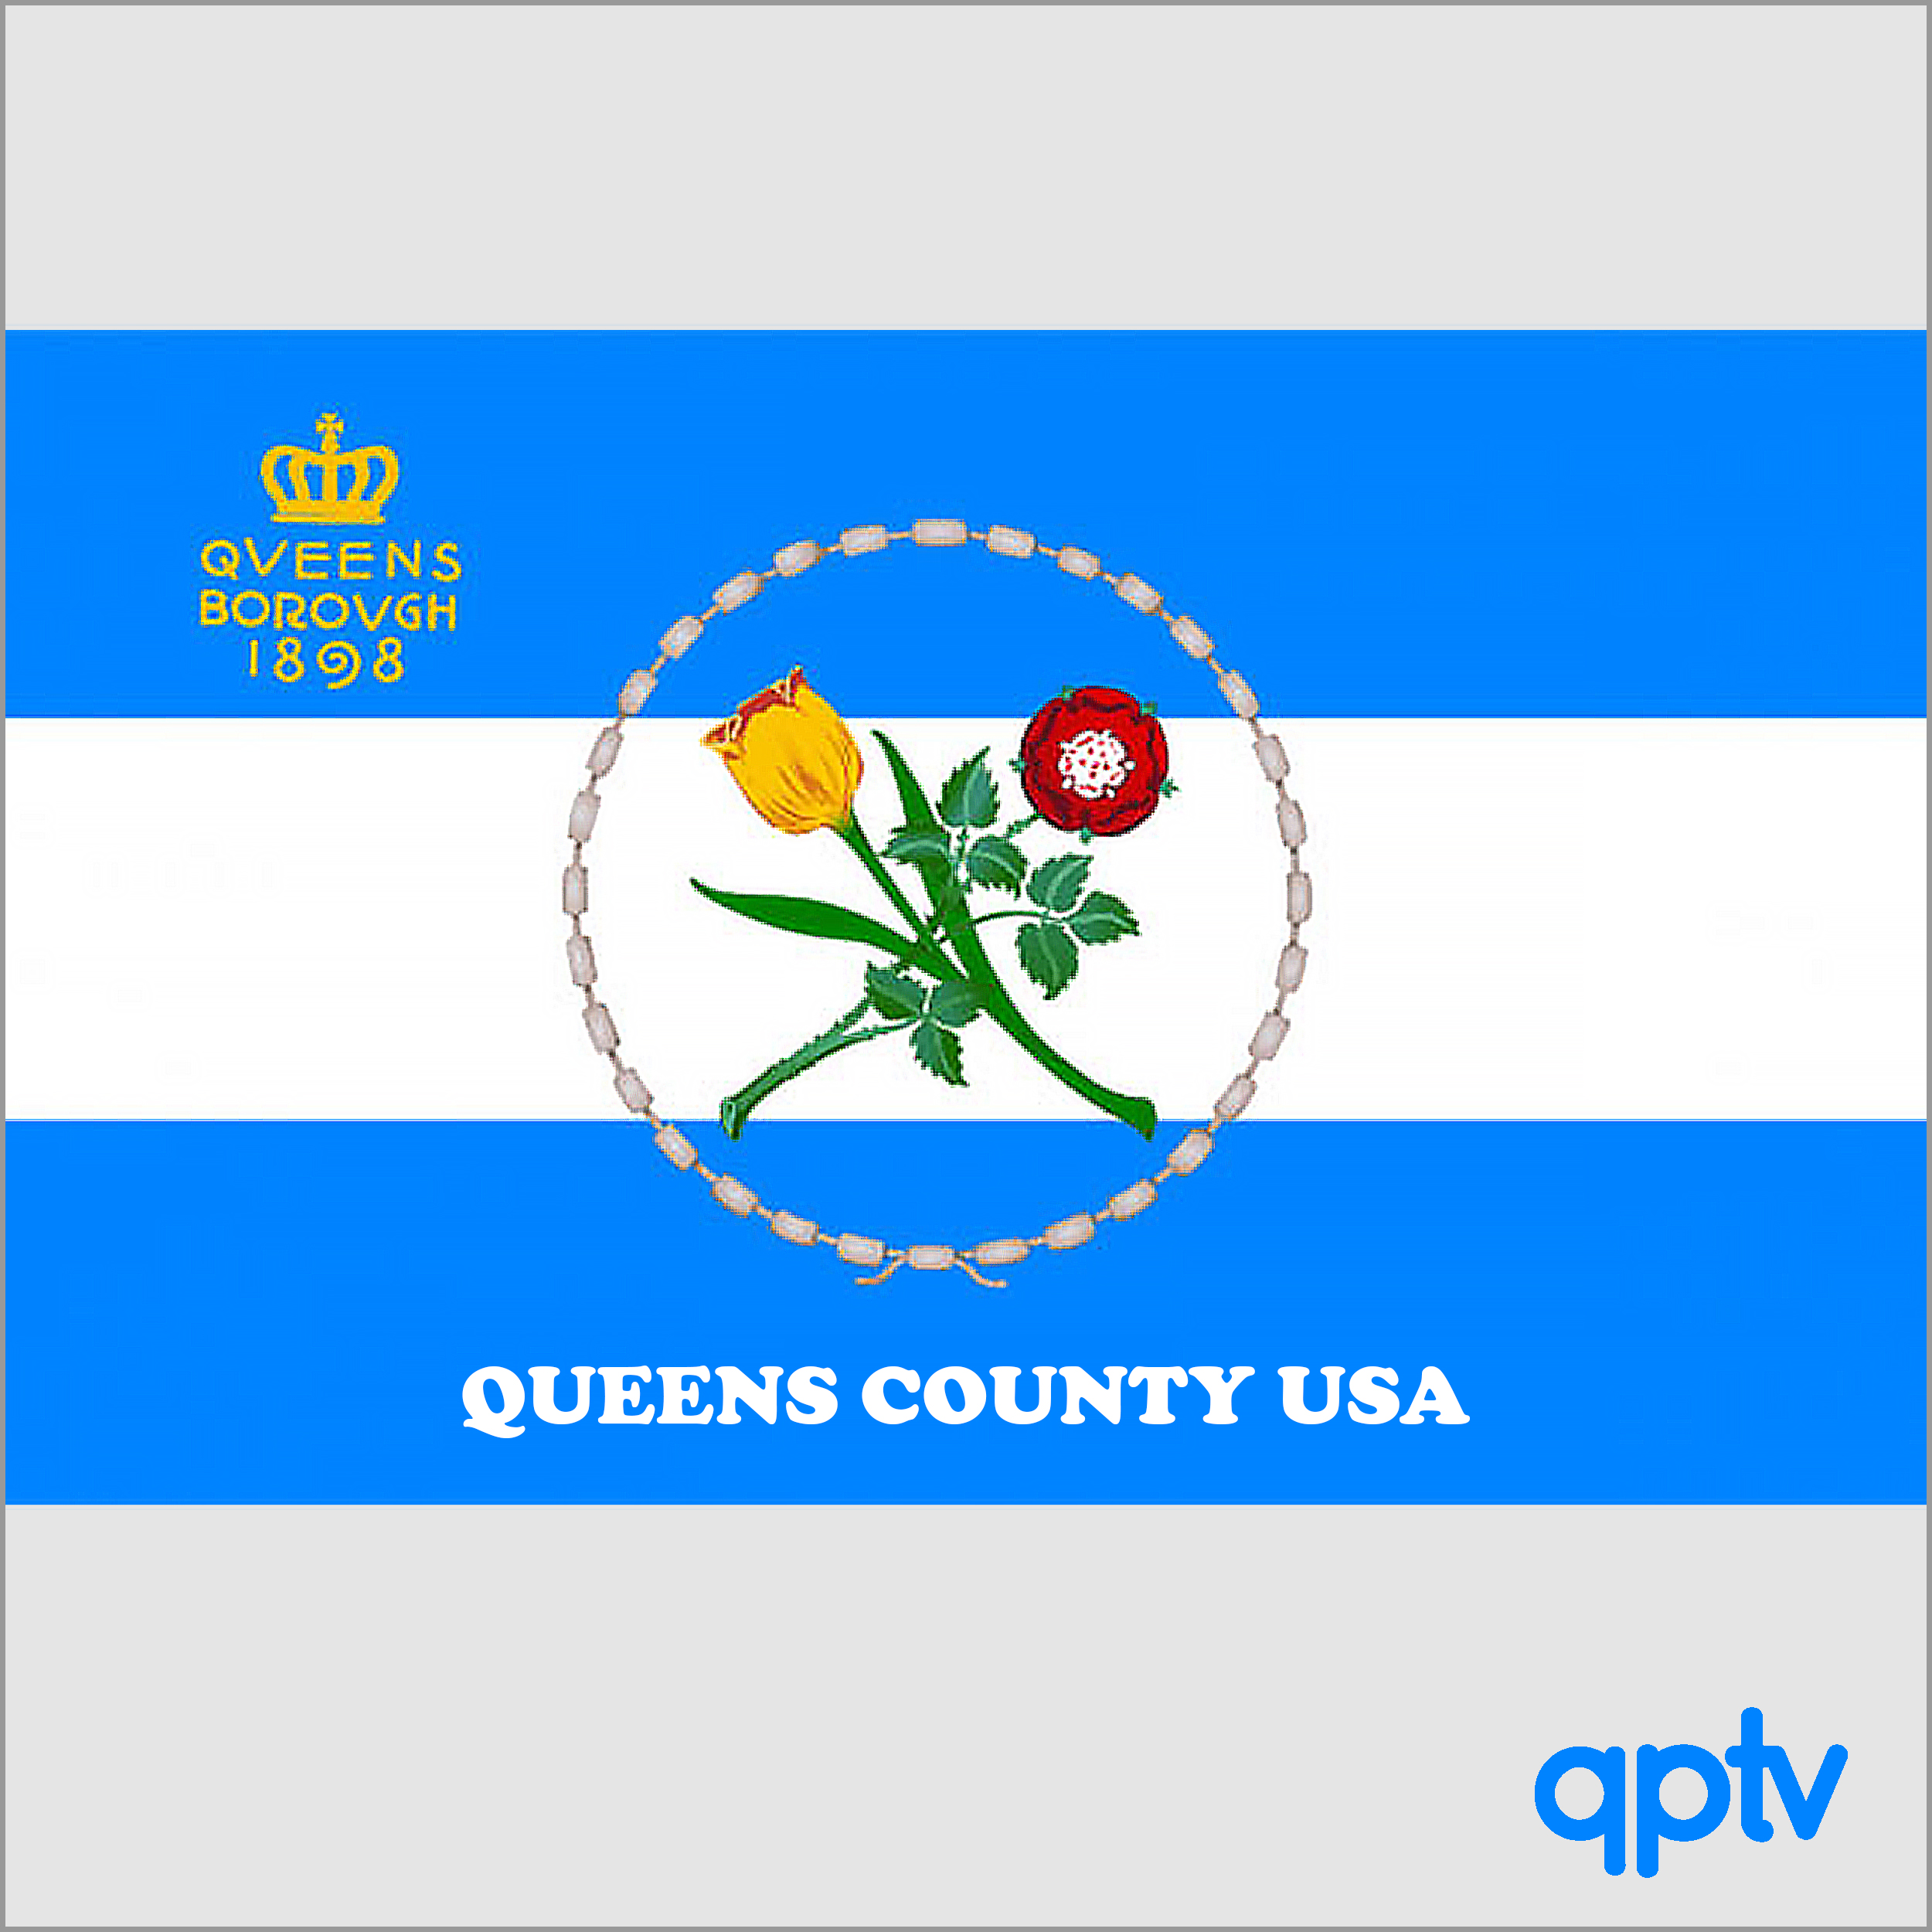 Queens County USA